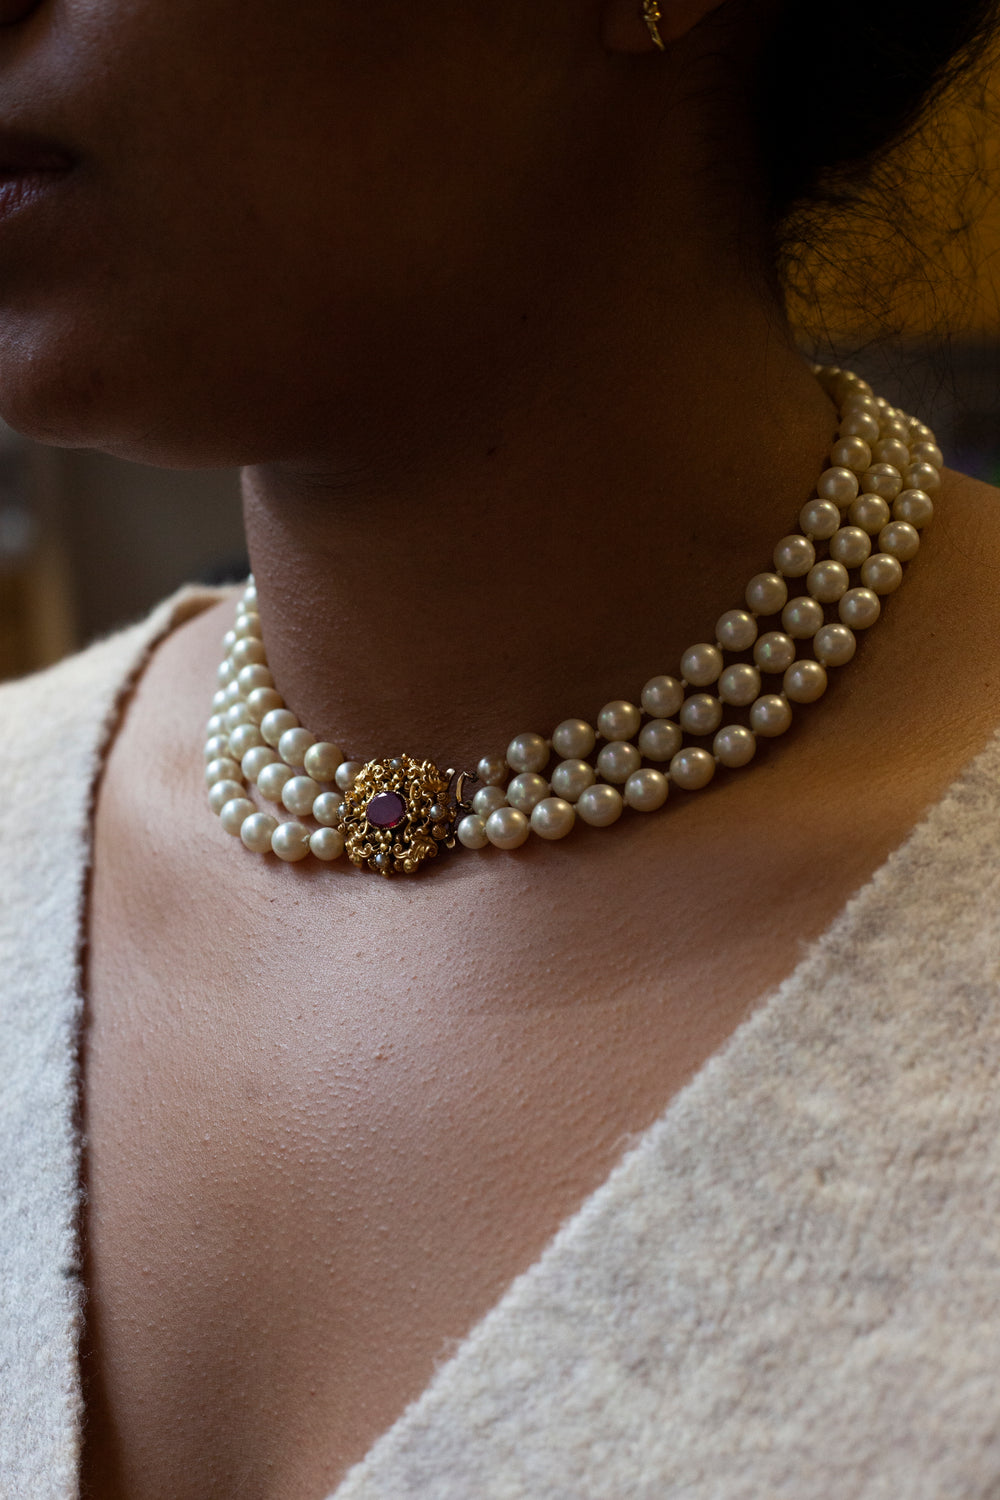 Three-Row Cultured Pearl Necklace with Garnet and Seed Pearl Yellow Gold Clasp